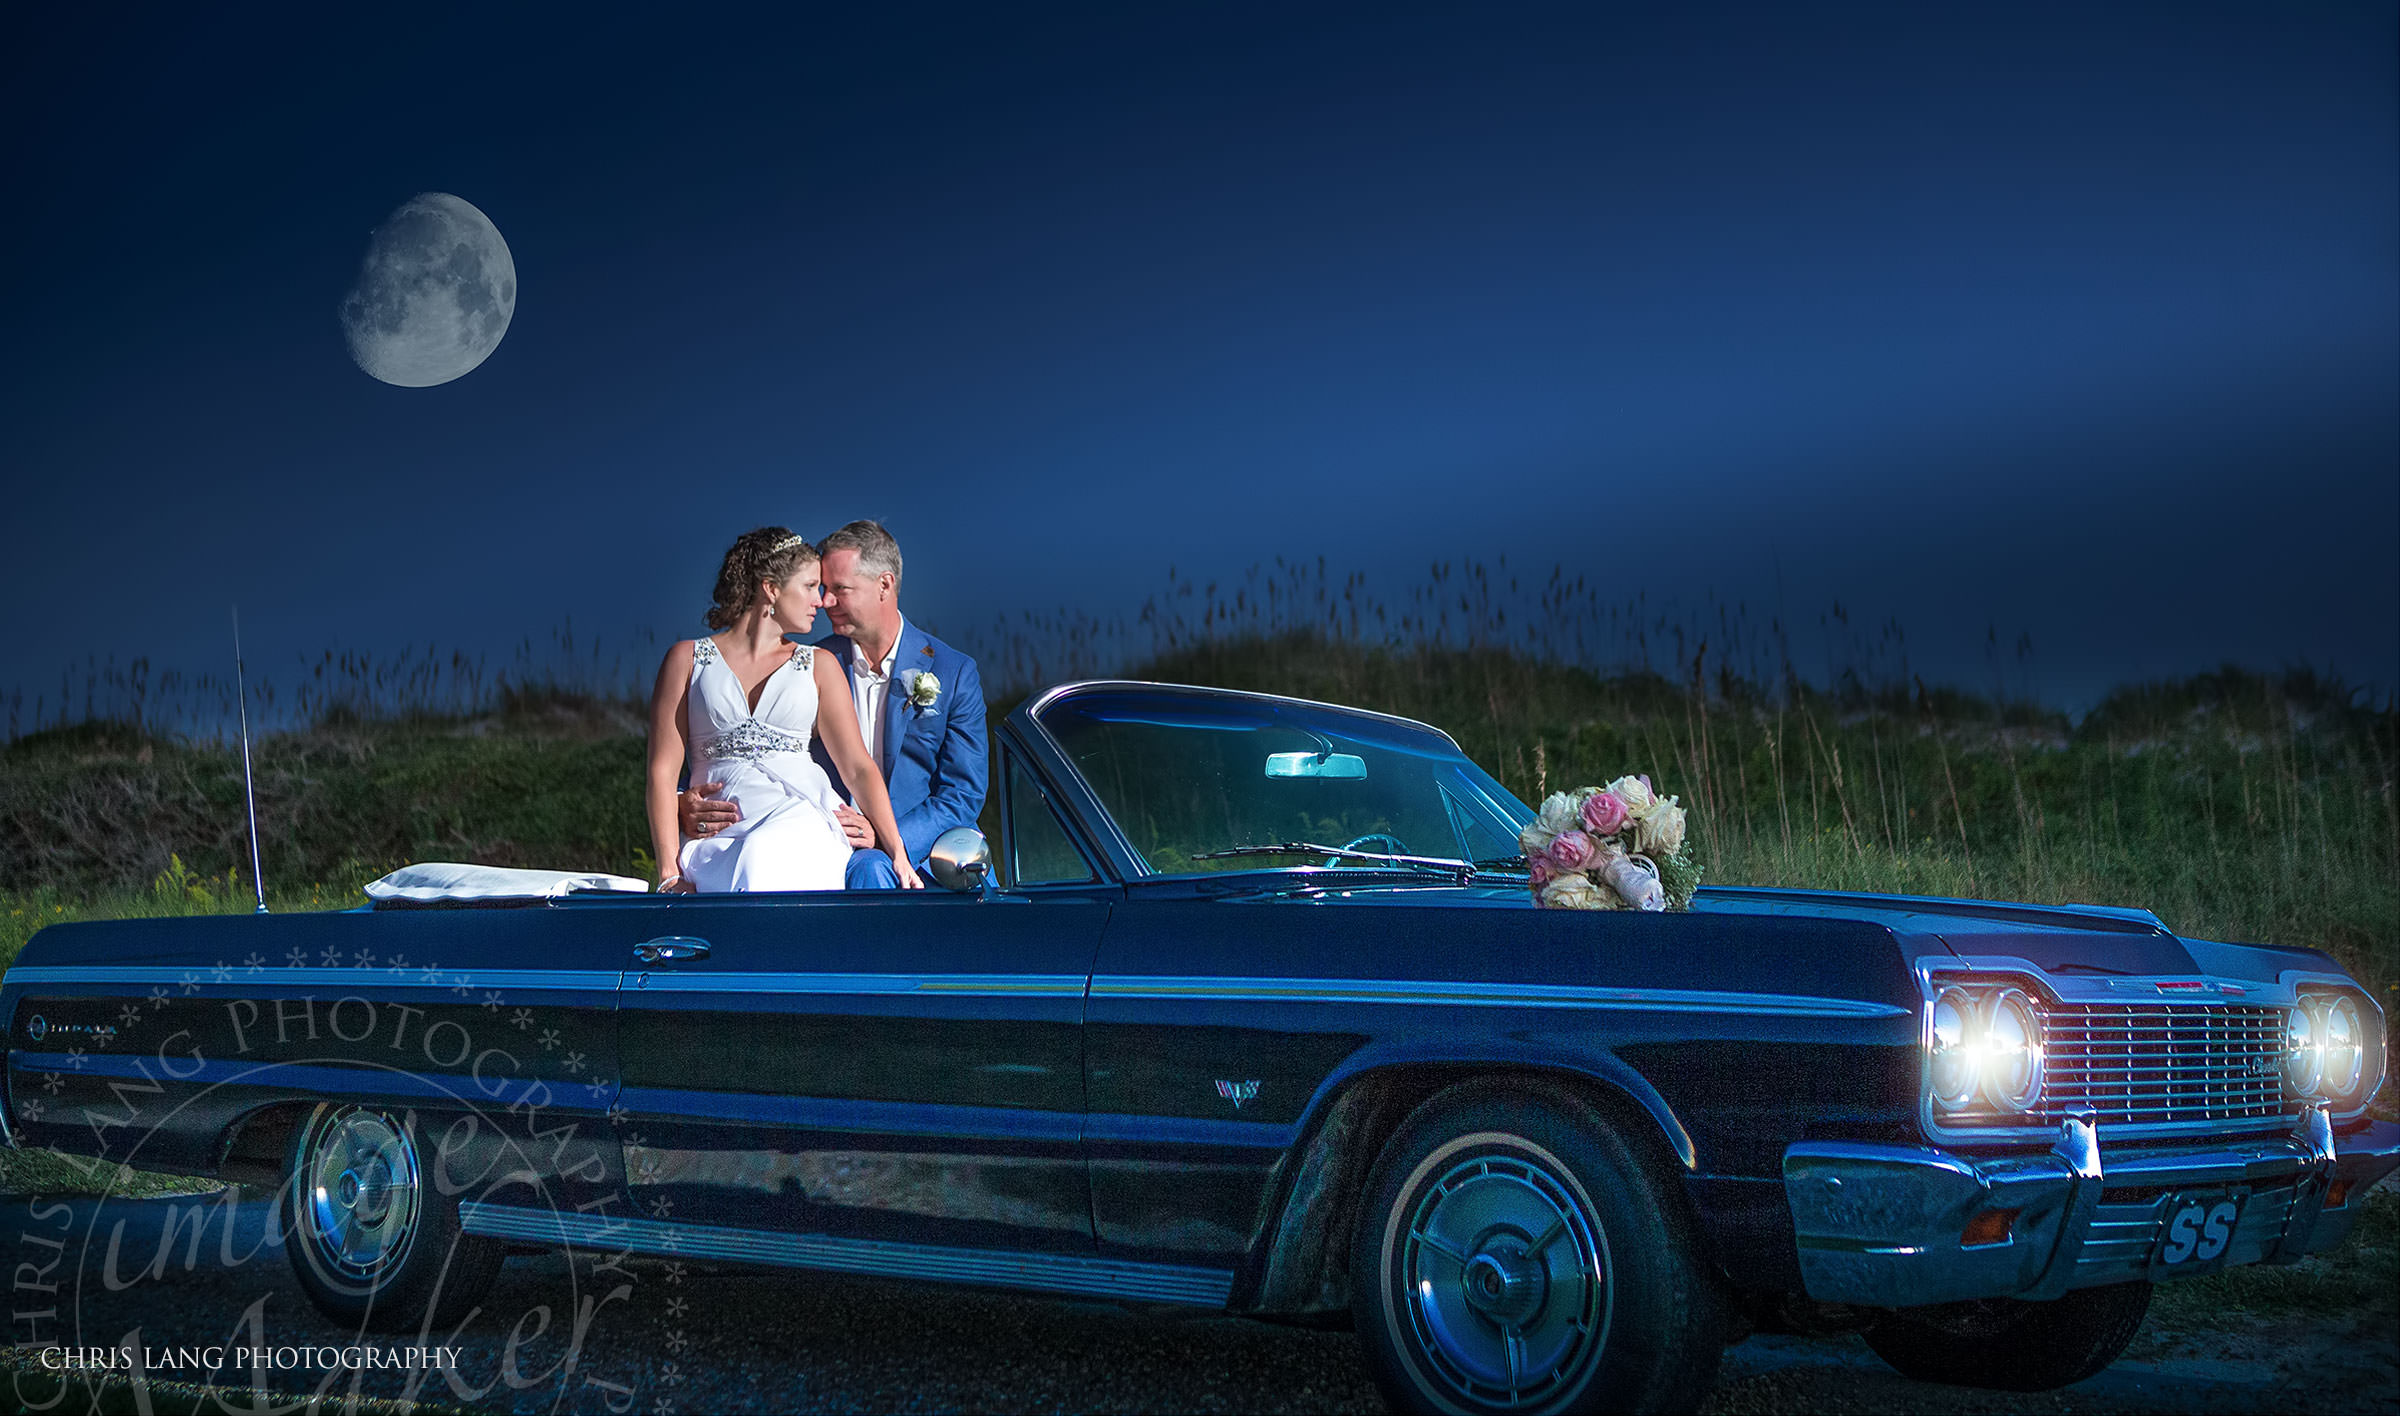 Wilmington NC Photographer - Chris Lang -  Image of bride & groom in convertable on the beach in the moon light